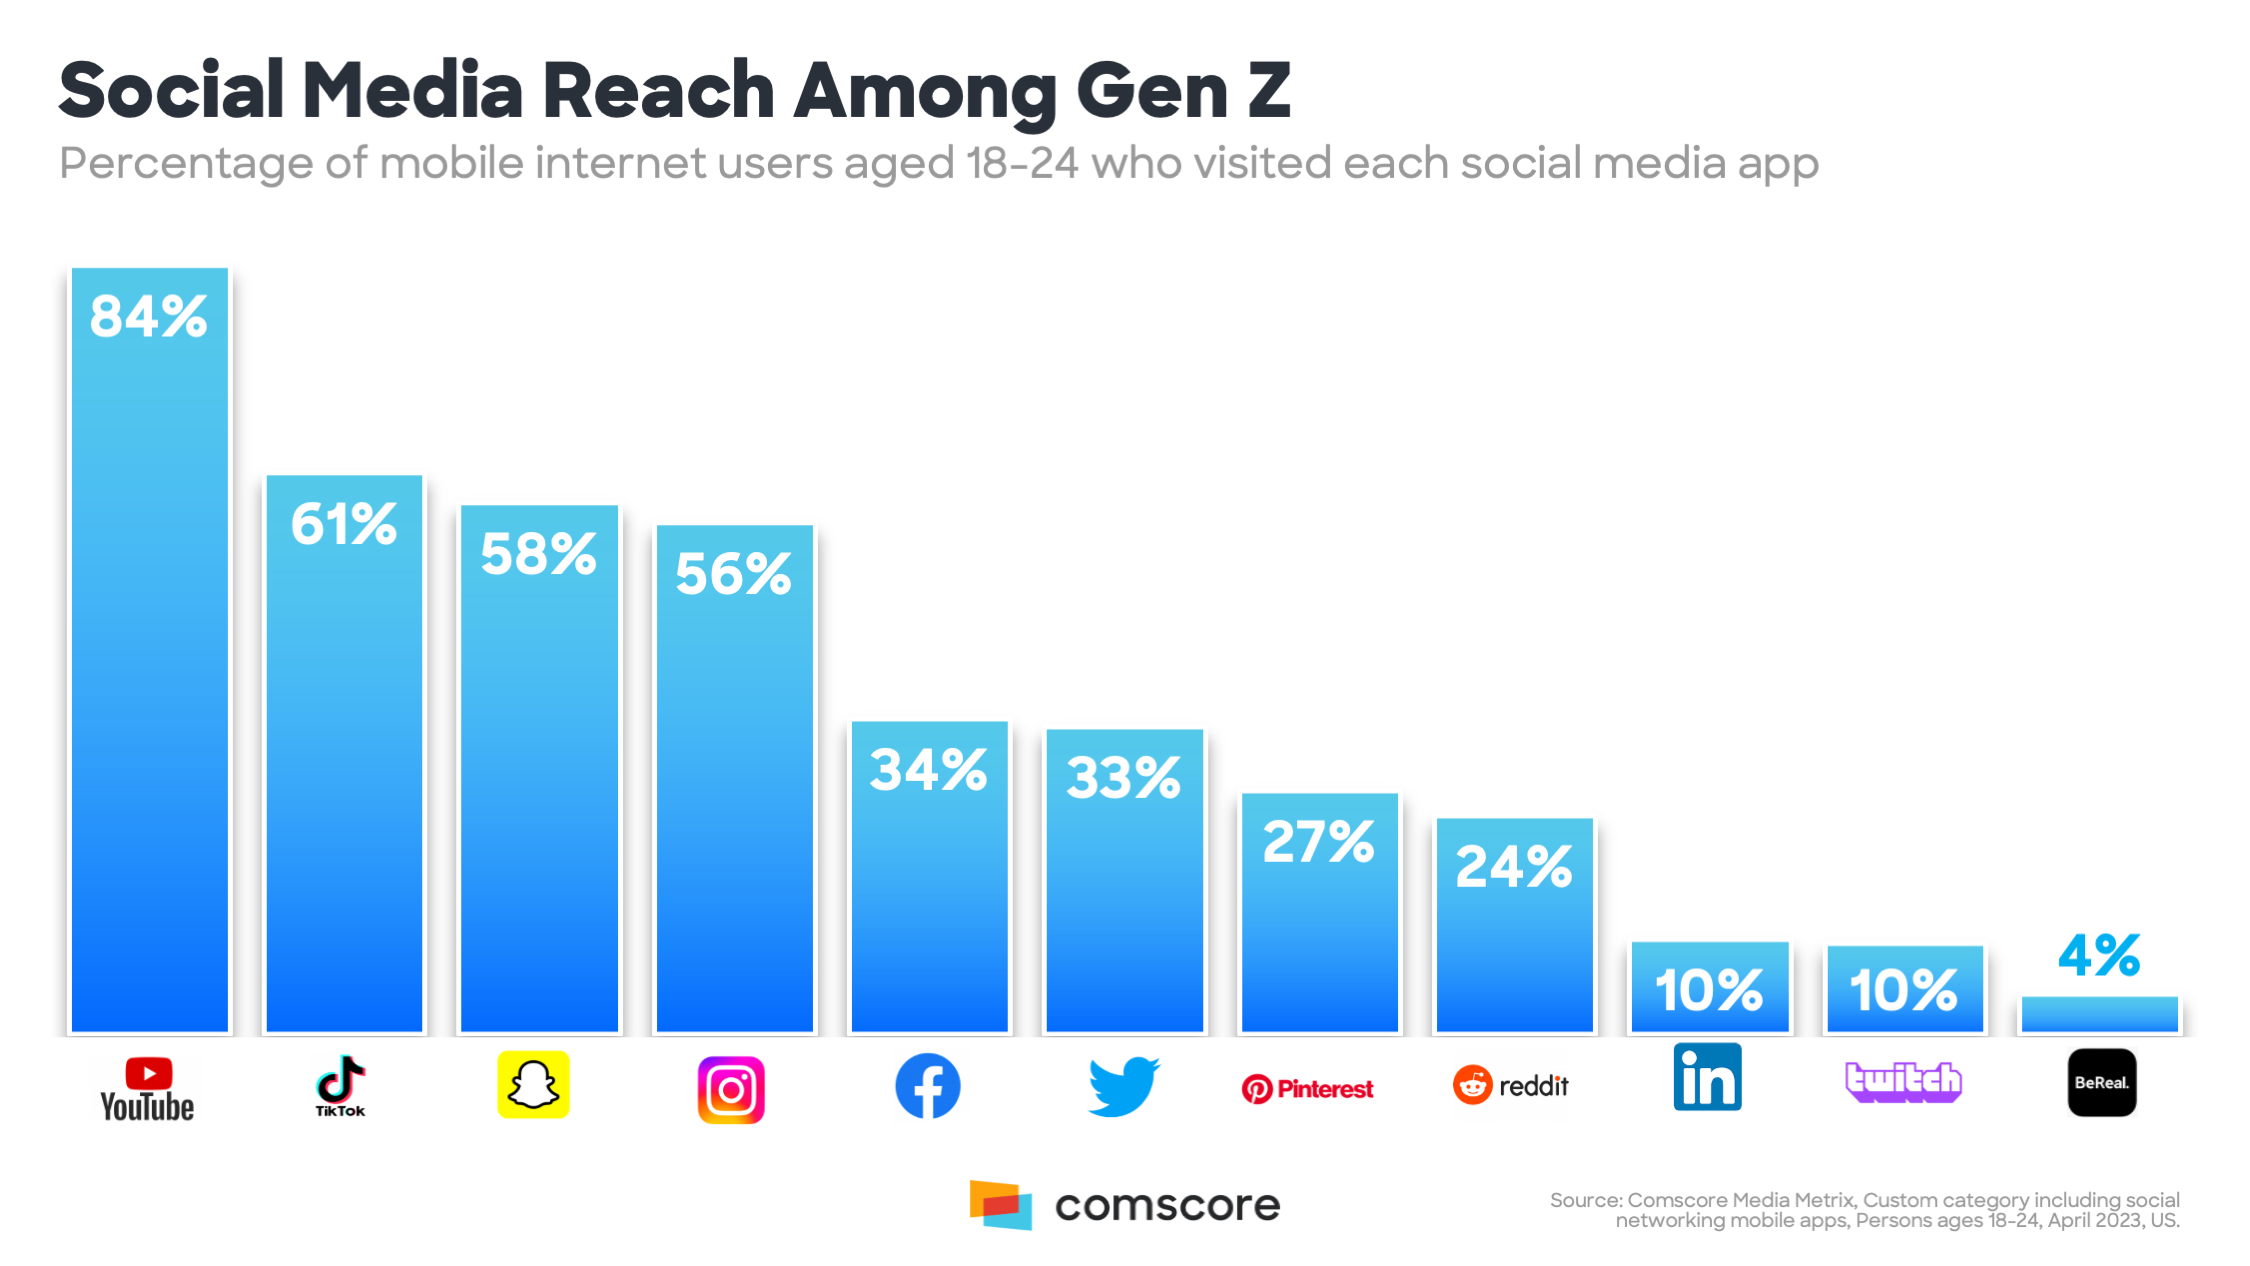 Social media reach among Gen Z; a chart based on research by Comscore.